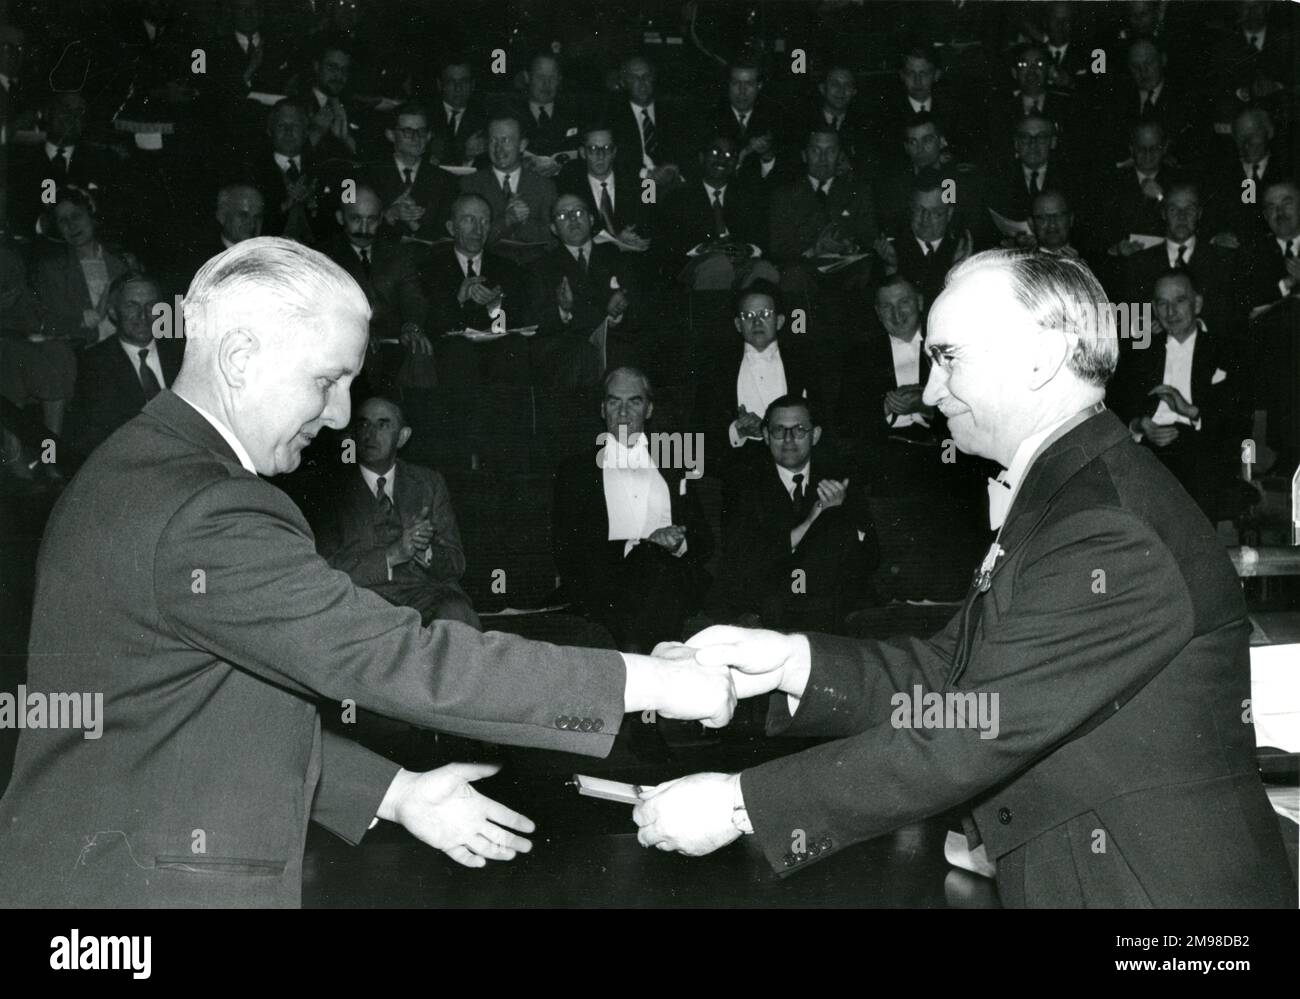 Dr E.S. Moult, left, Royal Aeronatical Society President 1960-1961 is presented with his Royal Aeronautical Society Silver Medal by E.T. Jones, CB, OBE, MEng, FRAeS, Royal Aeronautical Society President 1956-1957, at the 44th Wilbur Wright Lecture on 17 May 1956. Stock Photo